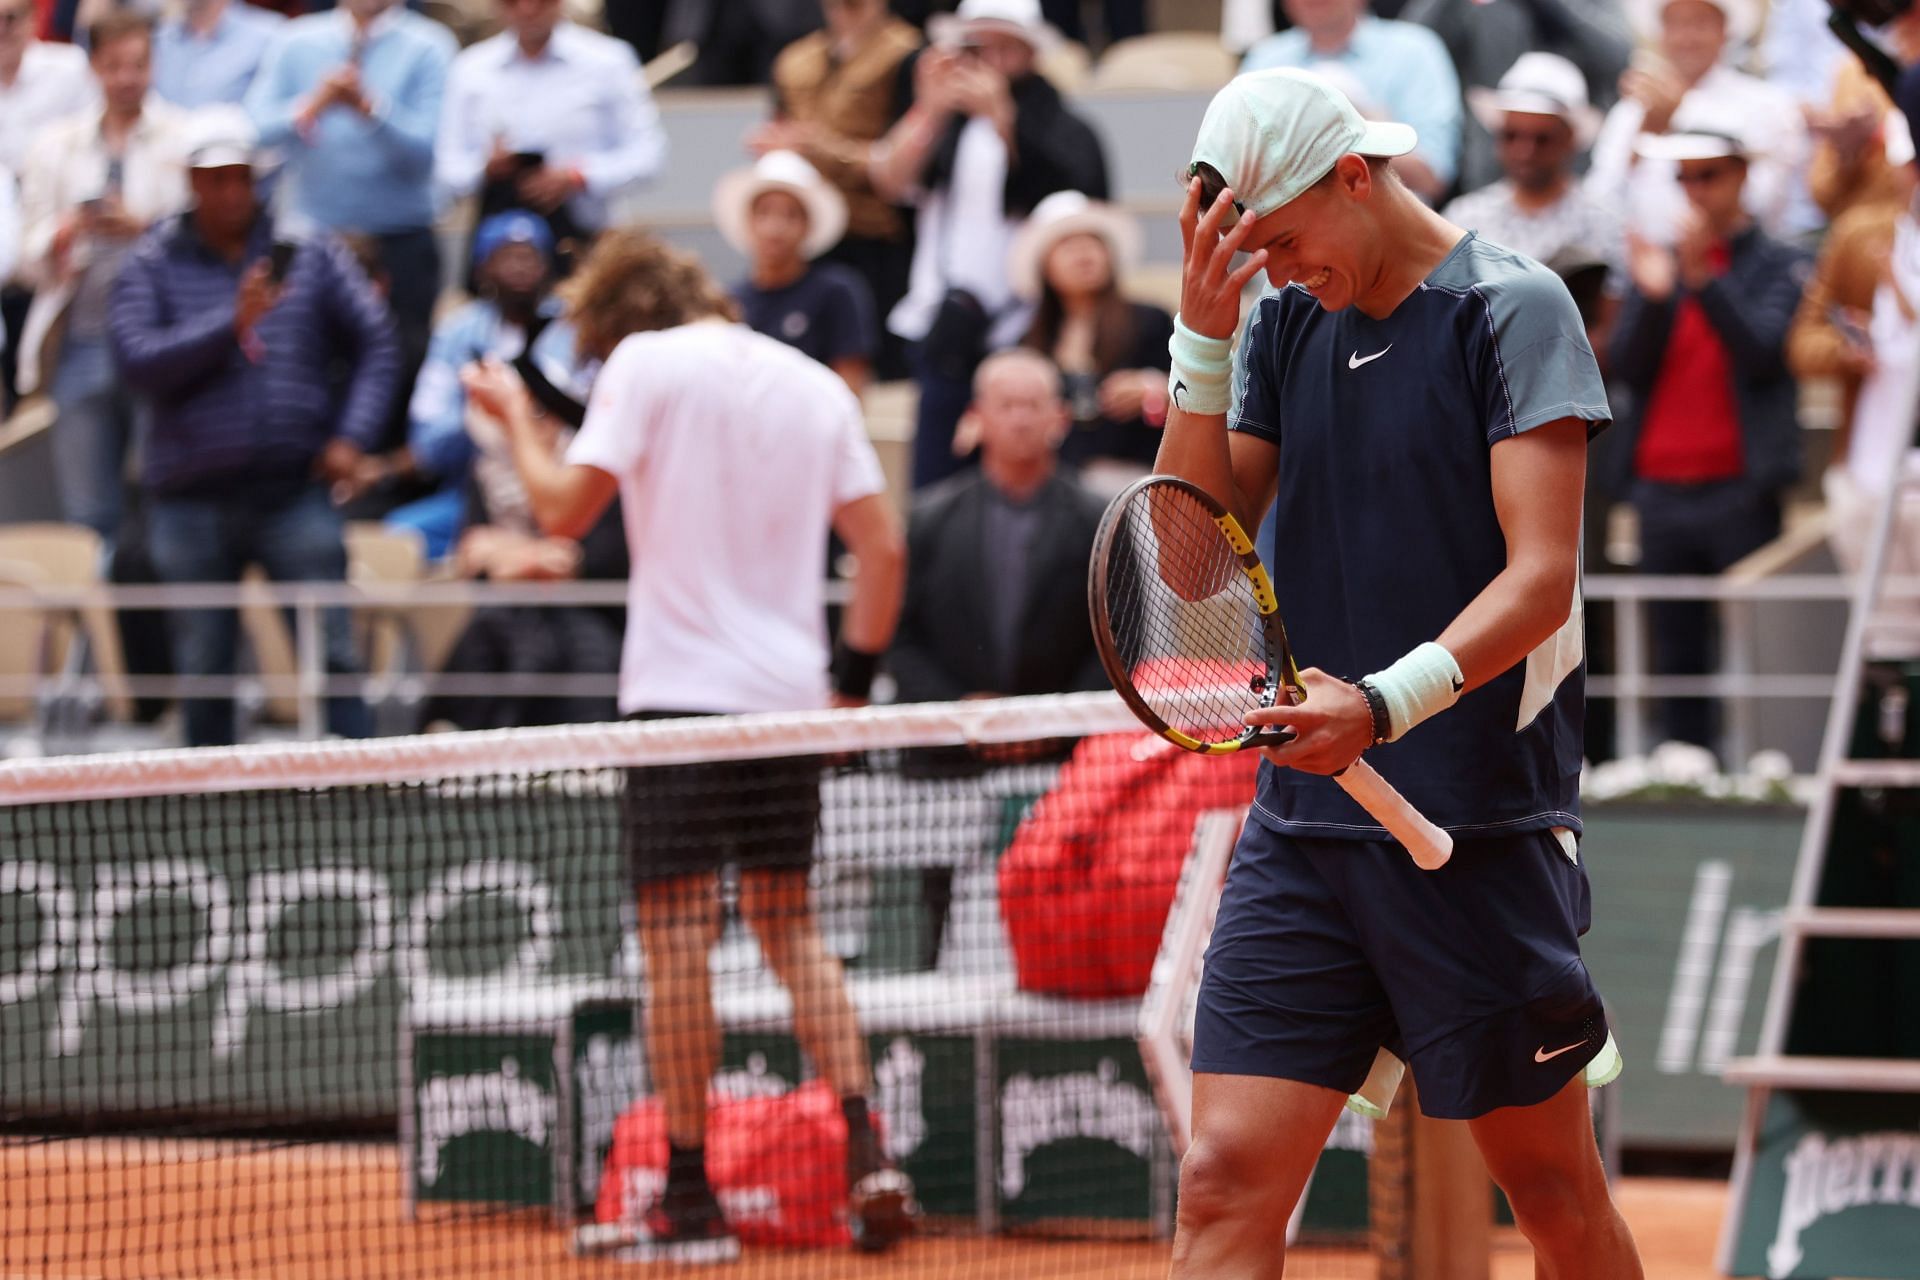 Holger Rune celebrates his win against fourth seed Stefanos Tsitsipas at the 2022 French Open